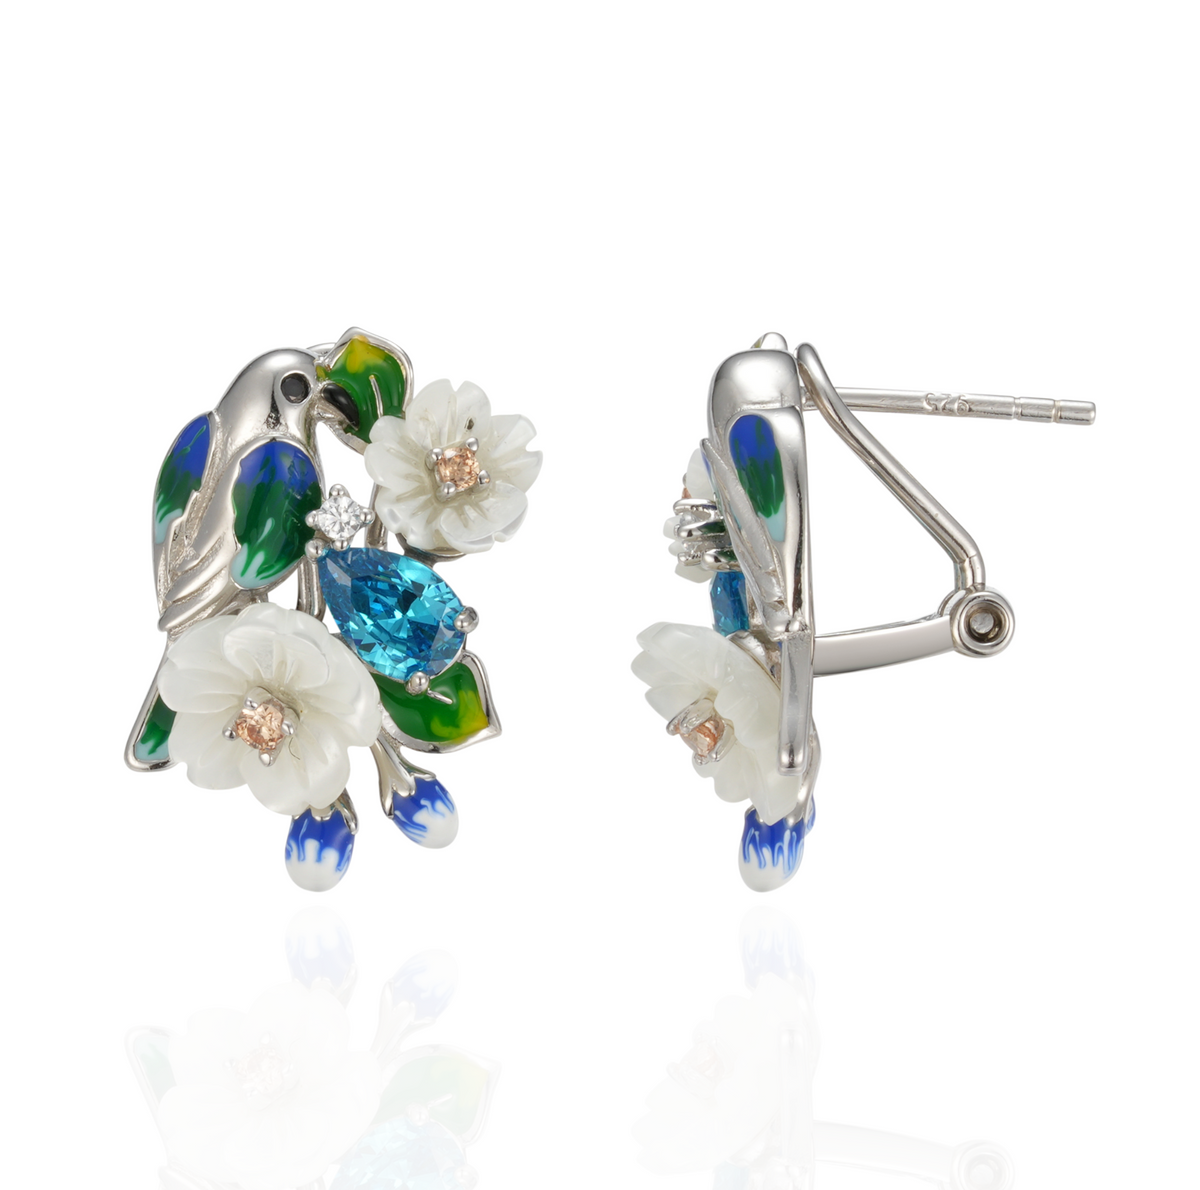 A pair of silver earrings with blue stones, enamel, shell flowers and a bird charm.